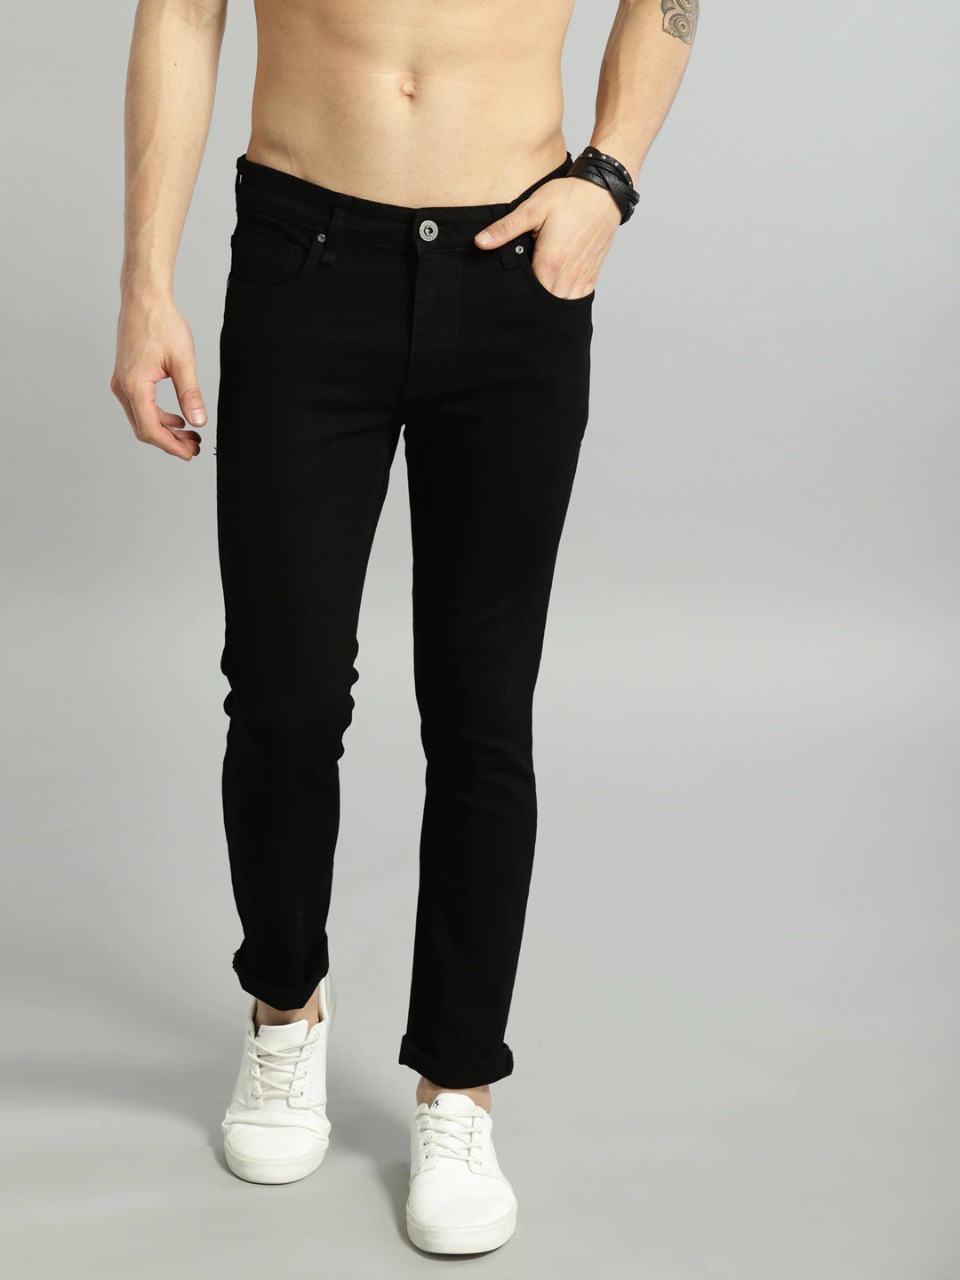 The Roadster - By Myntra Lifestyle Co Women Blue Skinny Fit Mid-Rise Clean  Look Stretchable Cotton Ready to Wear Jeans With Belt Loops - Walmart.com